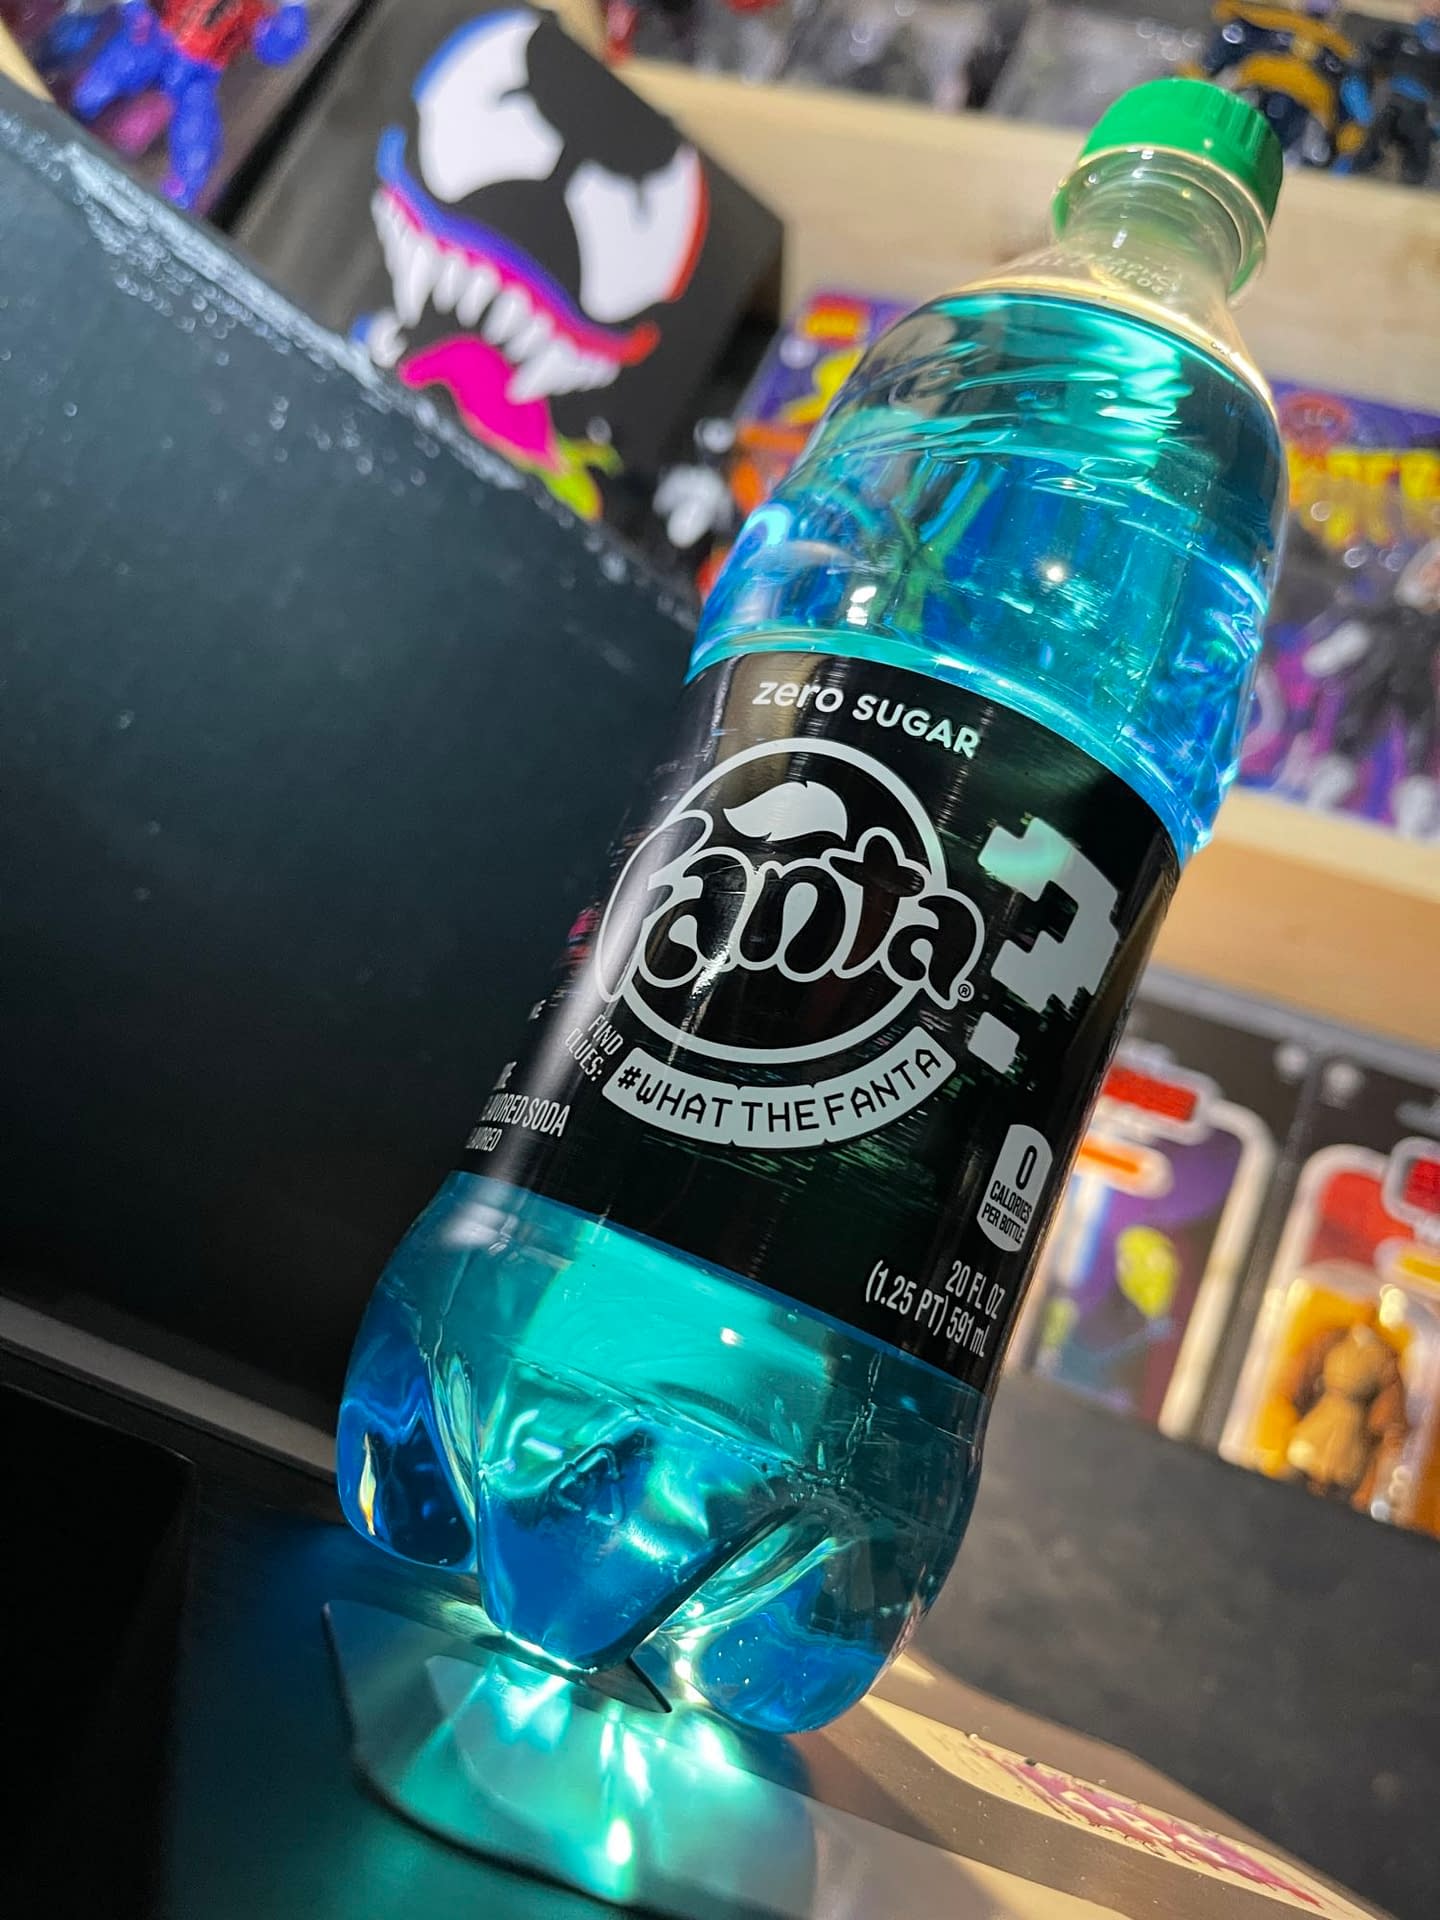 New Mystery Flavored Fanta Soda Will Have You Ask 